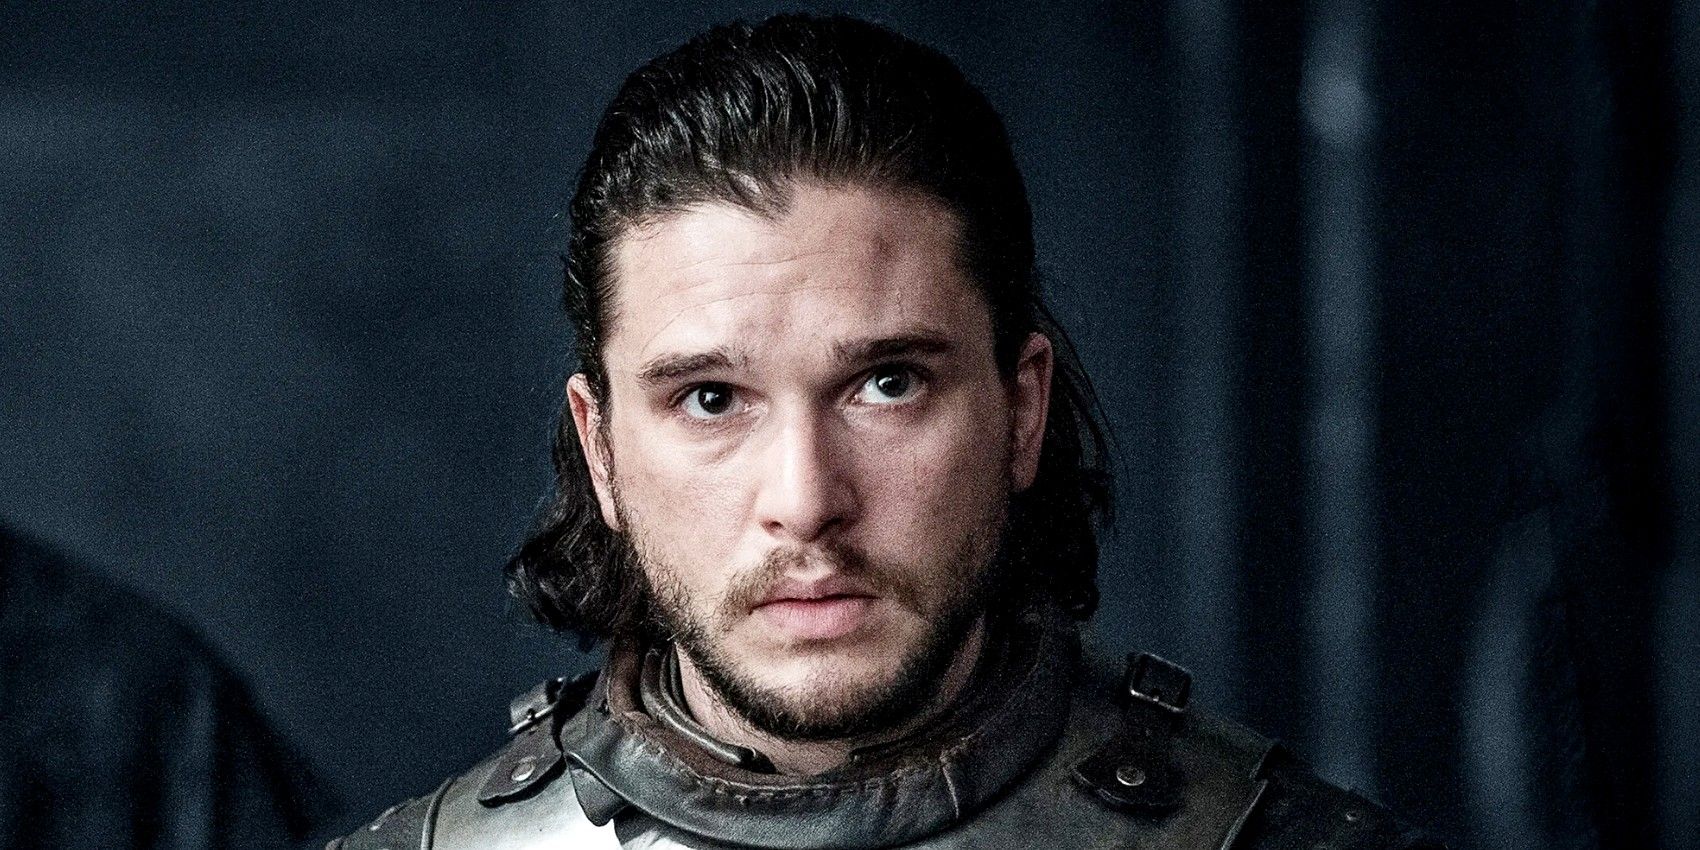 Kit Harington Says Game Of Thrones Starbucks Coffee Cup Wasn’t His Fault